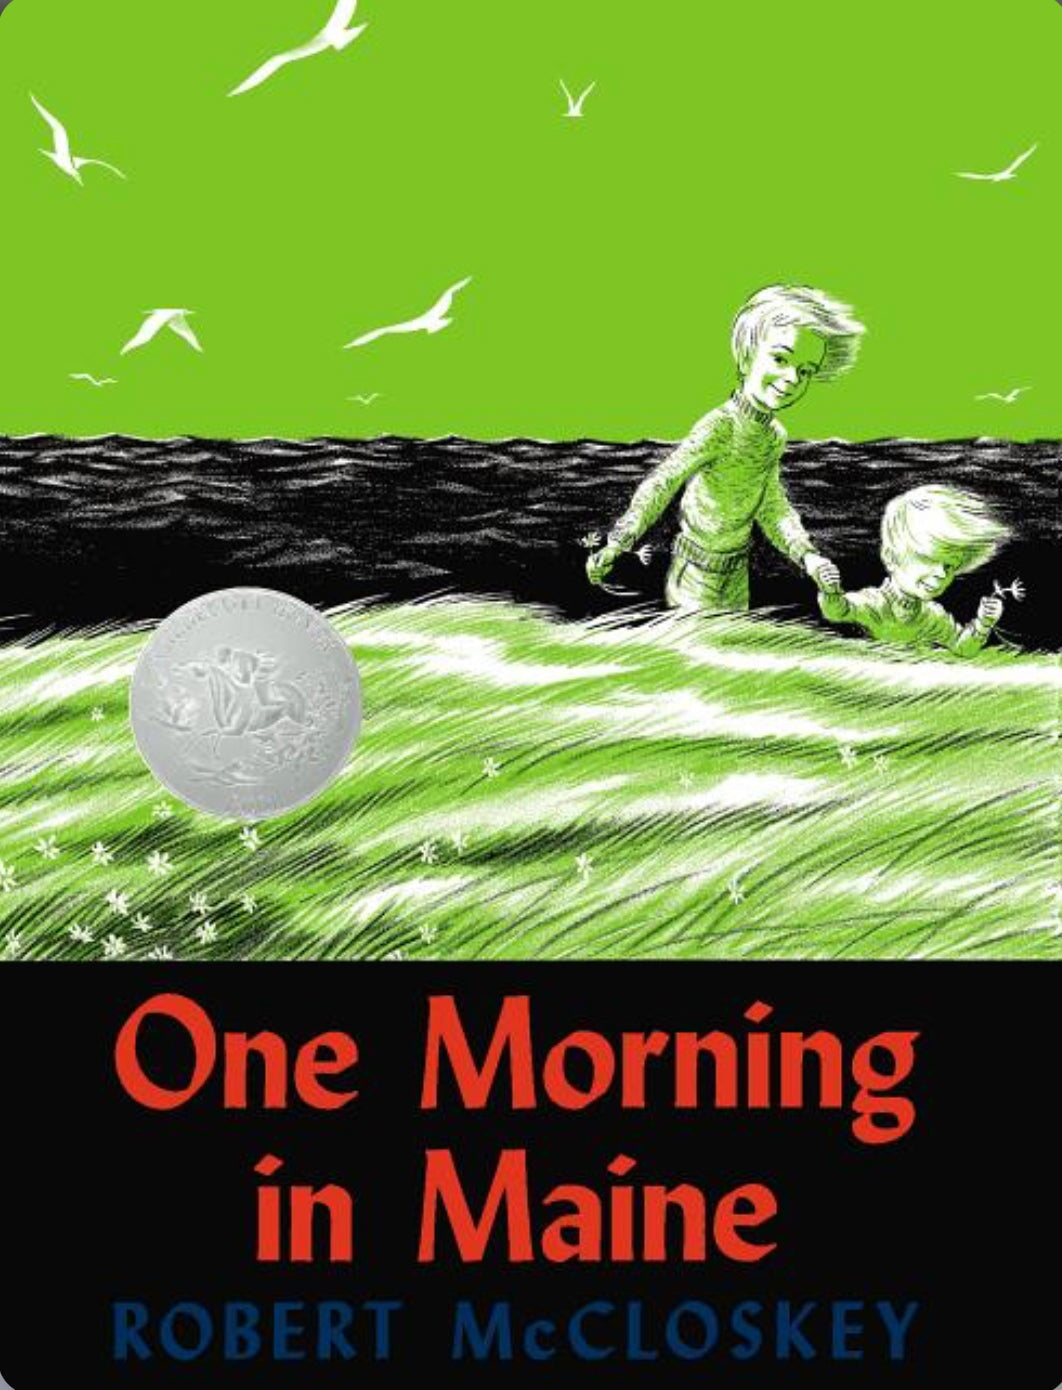 One Morning in Maine by Robert McClosky - Alder & Alouette